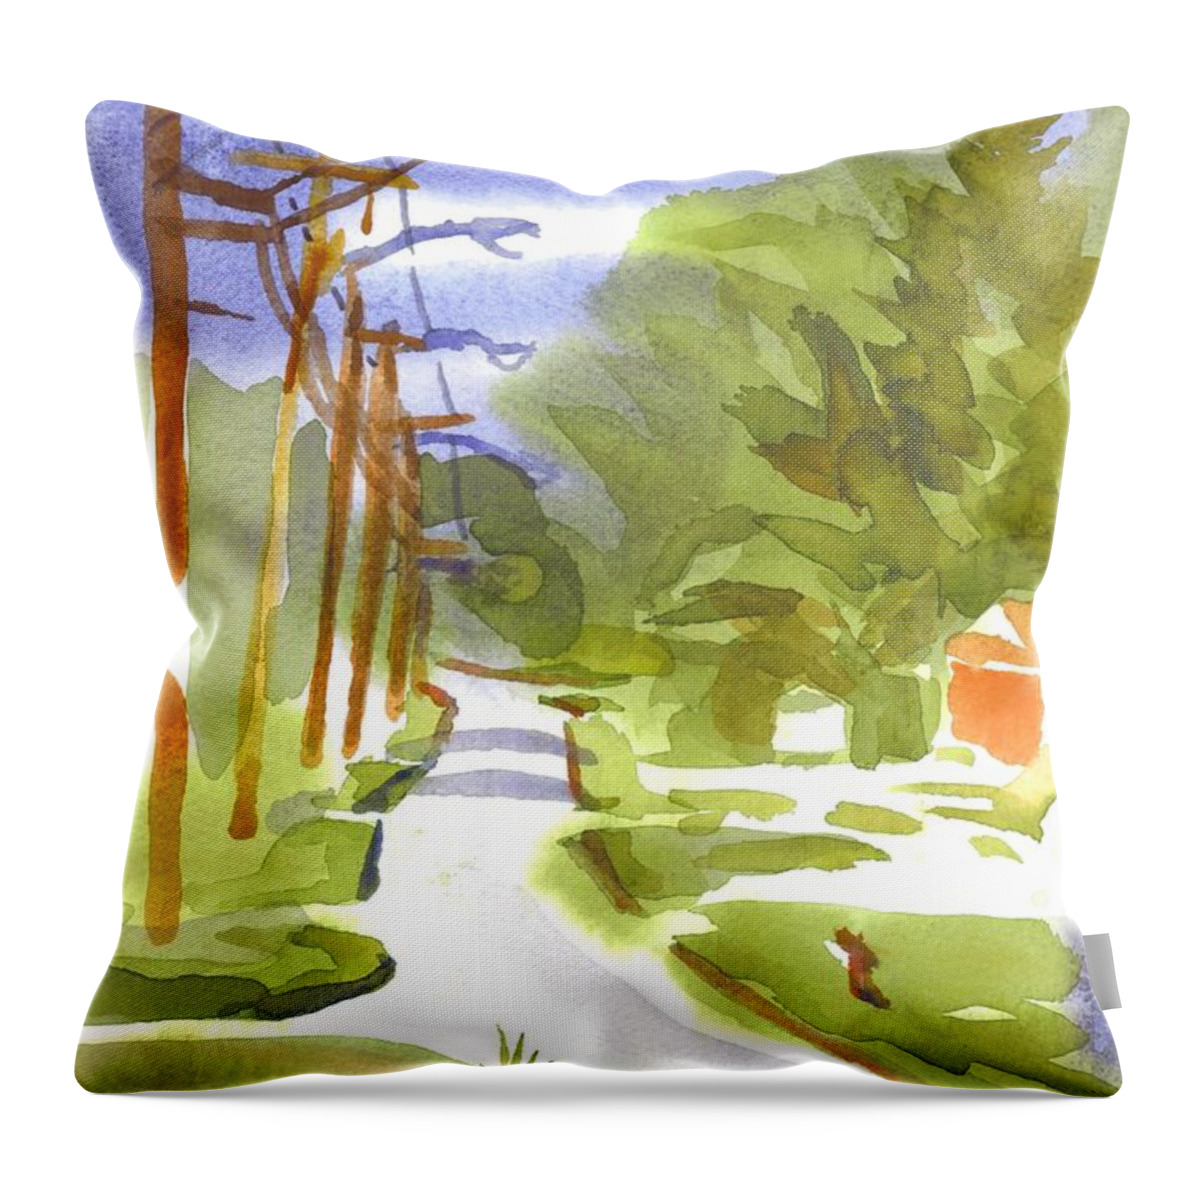 Main Street On A Cloudy Summers Day Throw Pillow featuring the painting Main Street on a Cloudy Summers Day by Kip DeVore